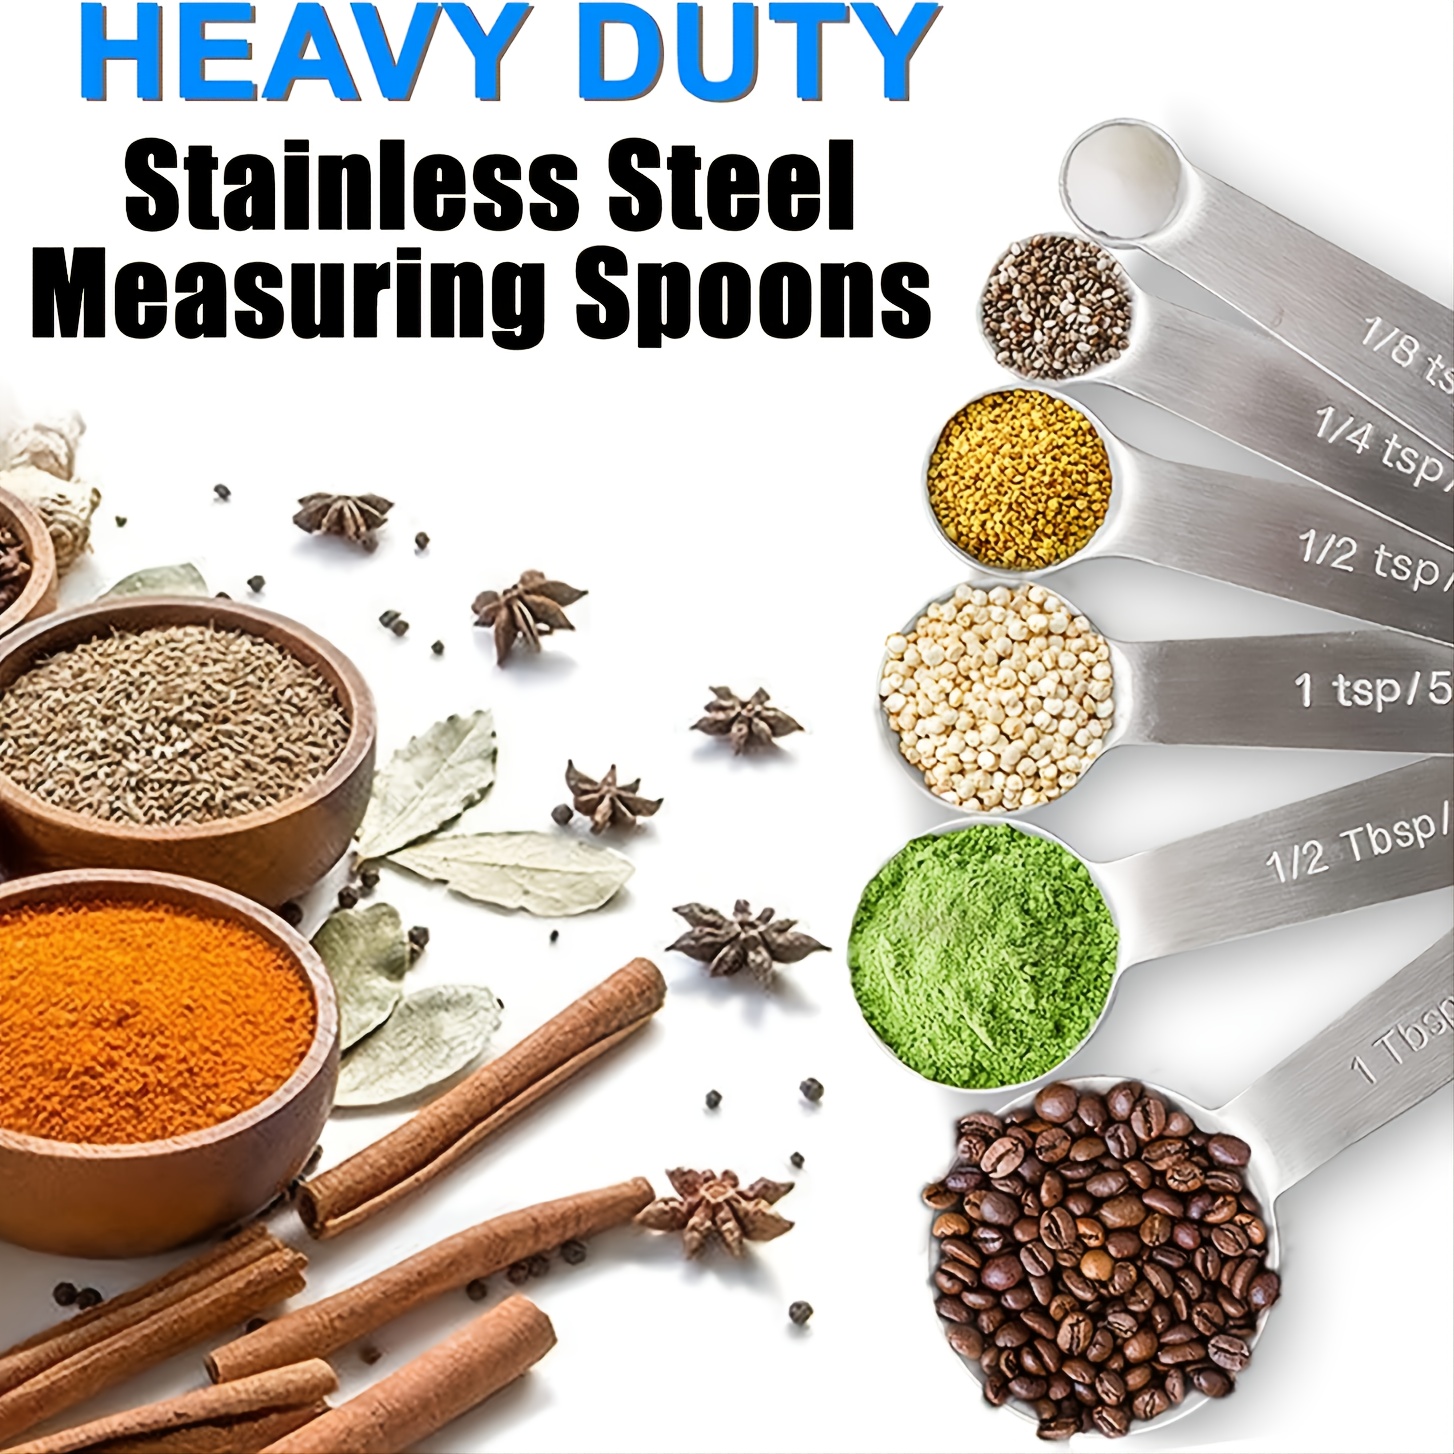 Heavy Duty 18/8 Stainless Steel Metal Measuring Spoons Set for Dry or Liquid, Tablespoon Measure Spoon for Baking, Fits in Spice Jar, Set of 7